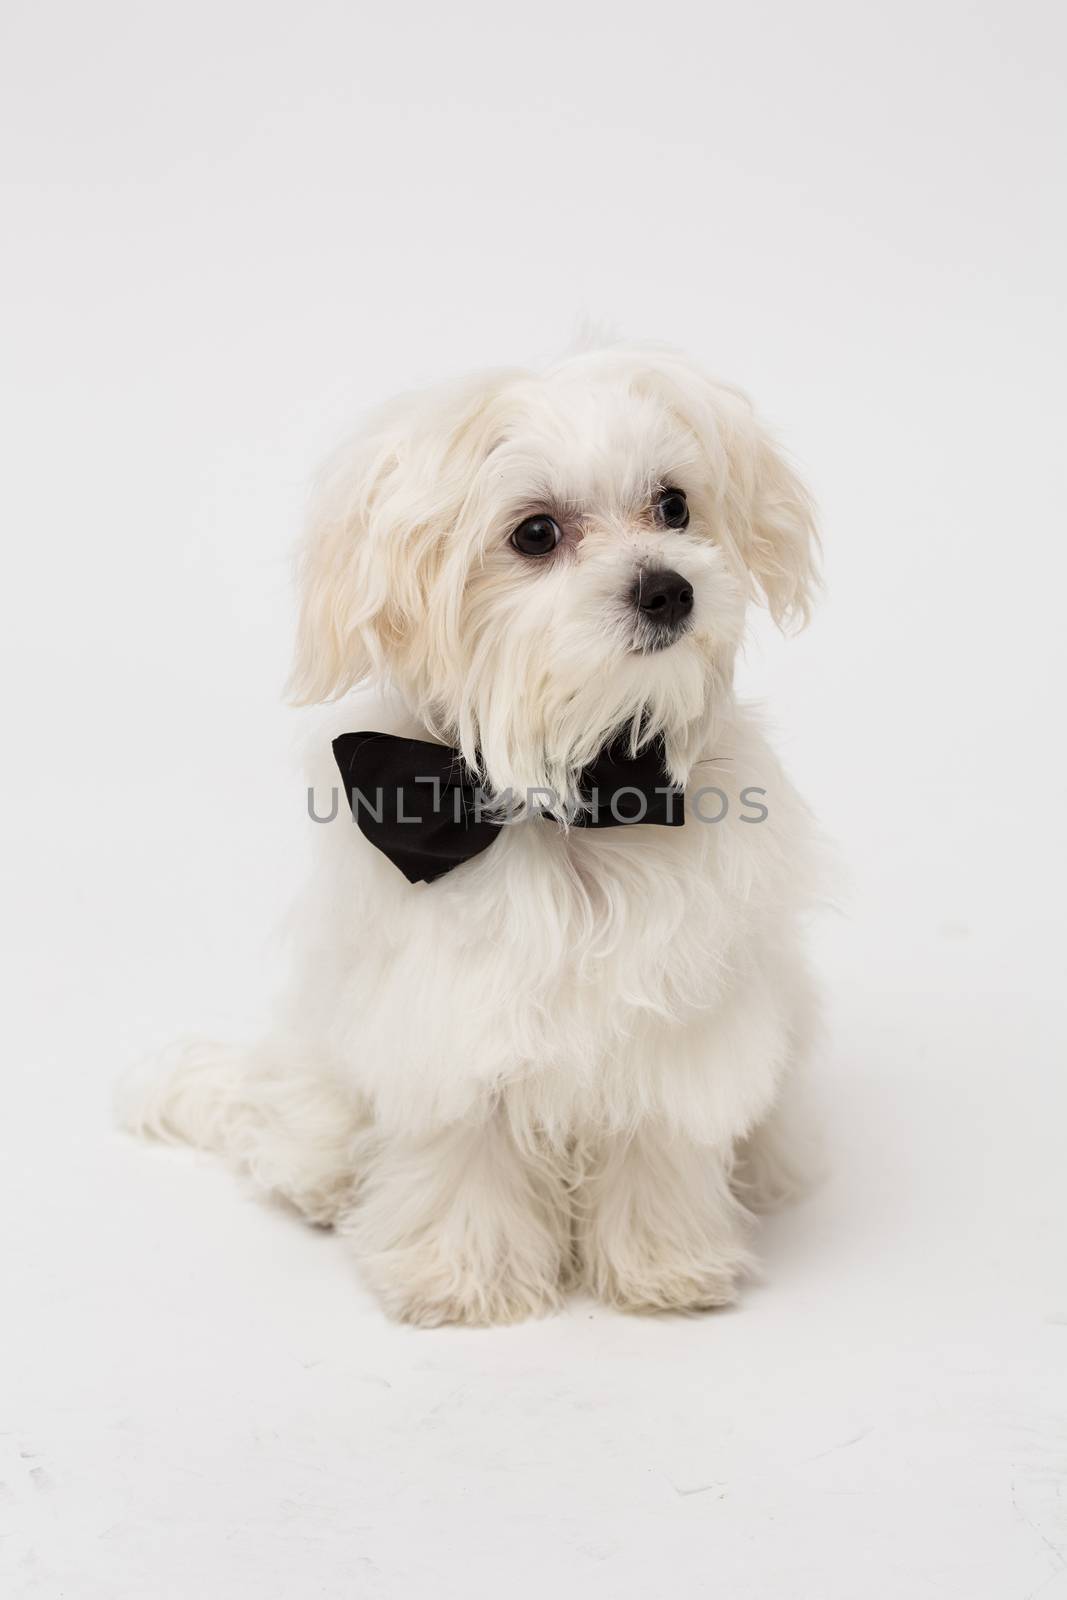 White Maltese dog with black bow and on white background.